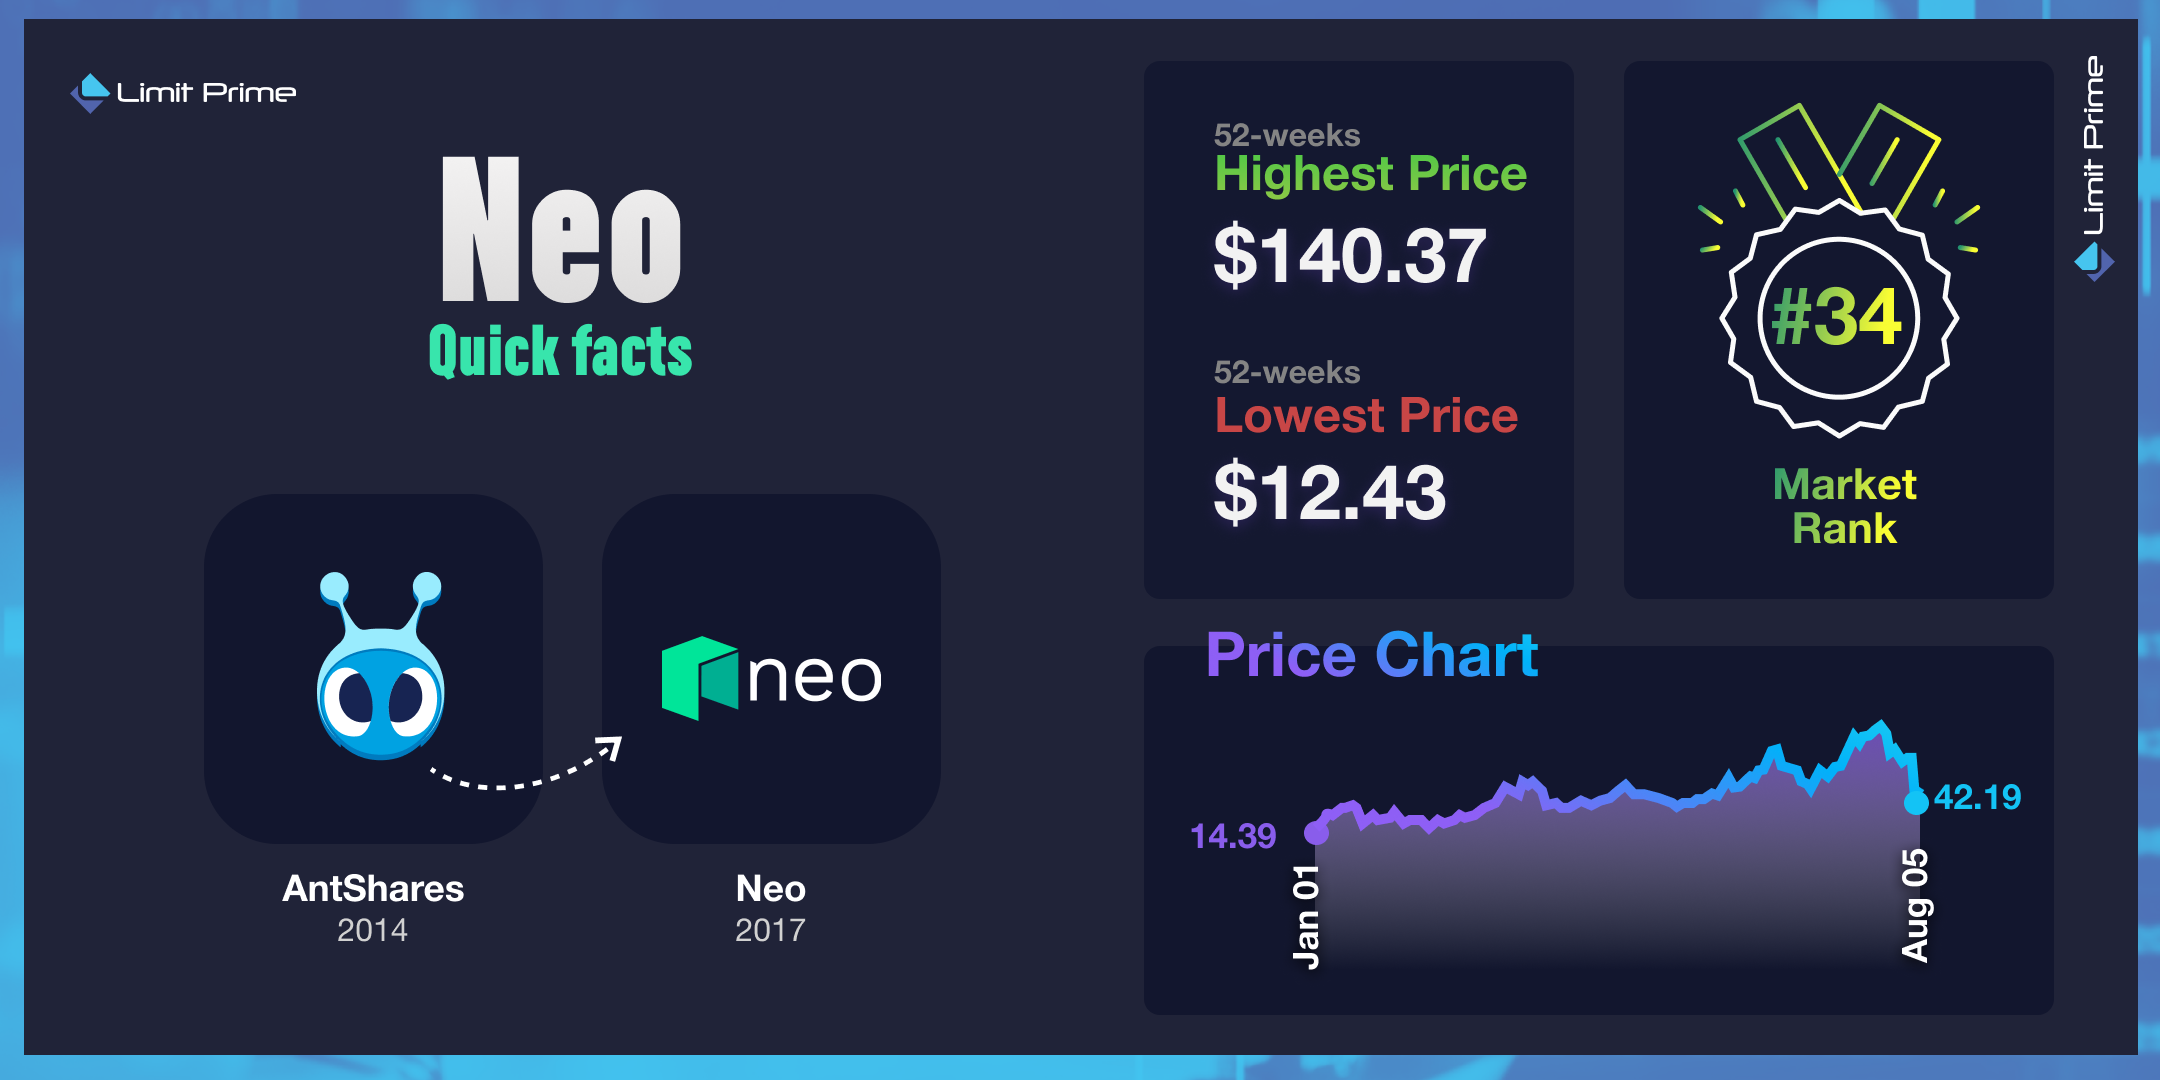 Neo - Quick Facts